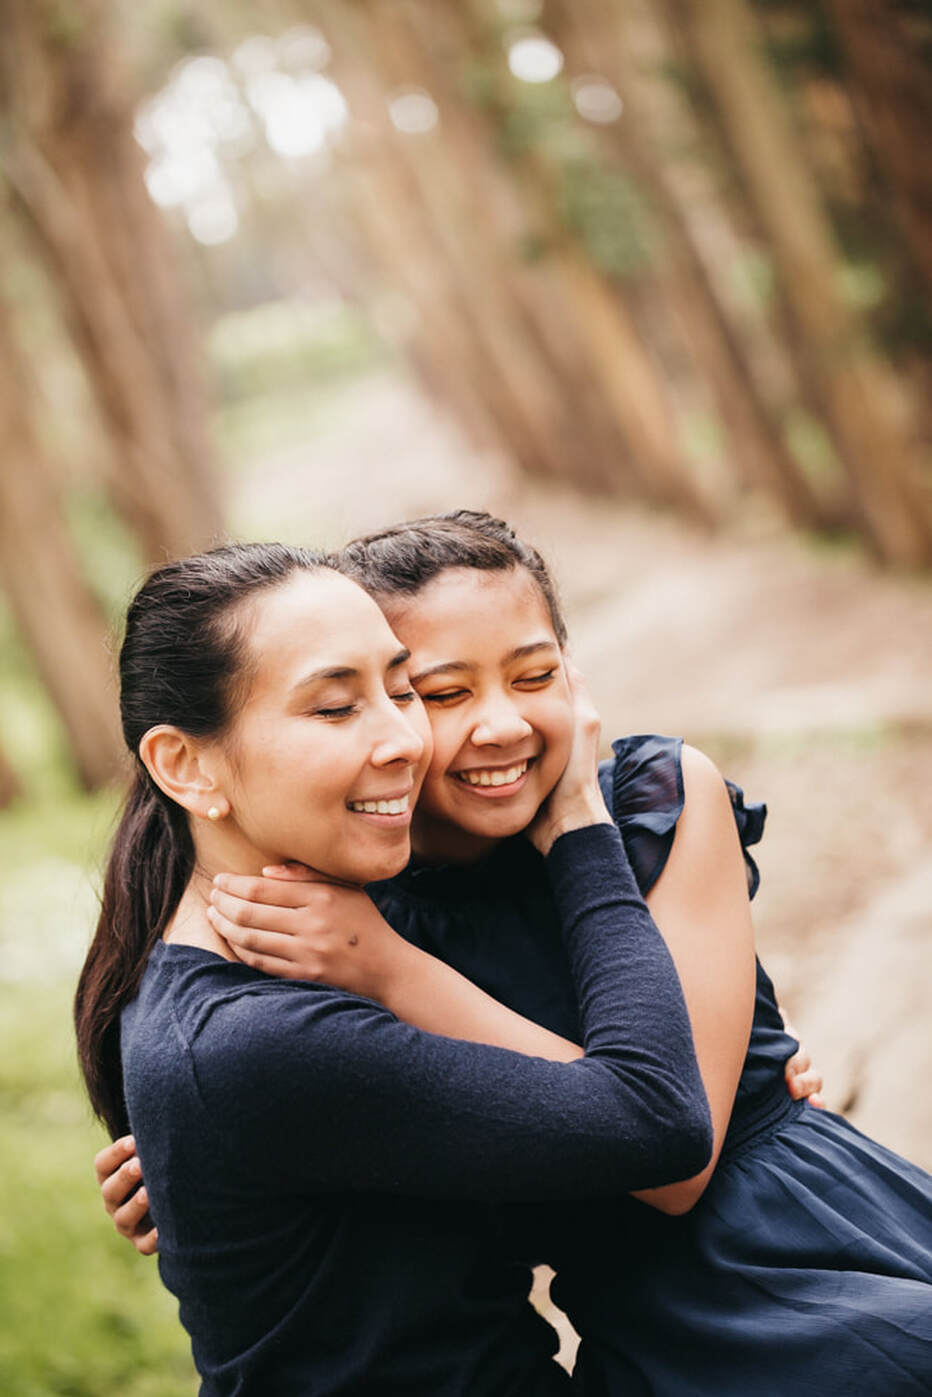 Picture of mother-daughter embraced